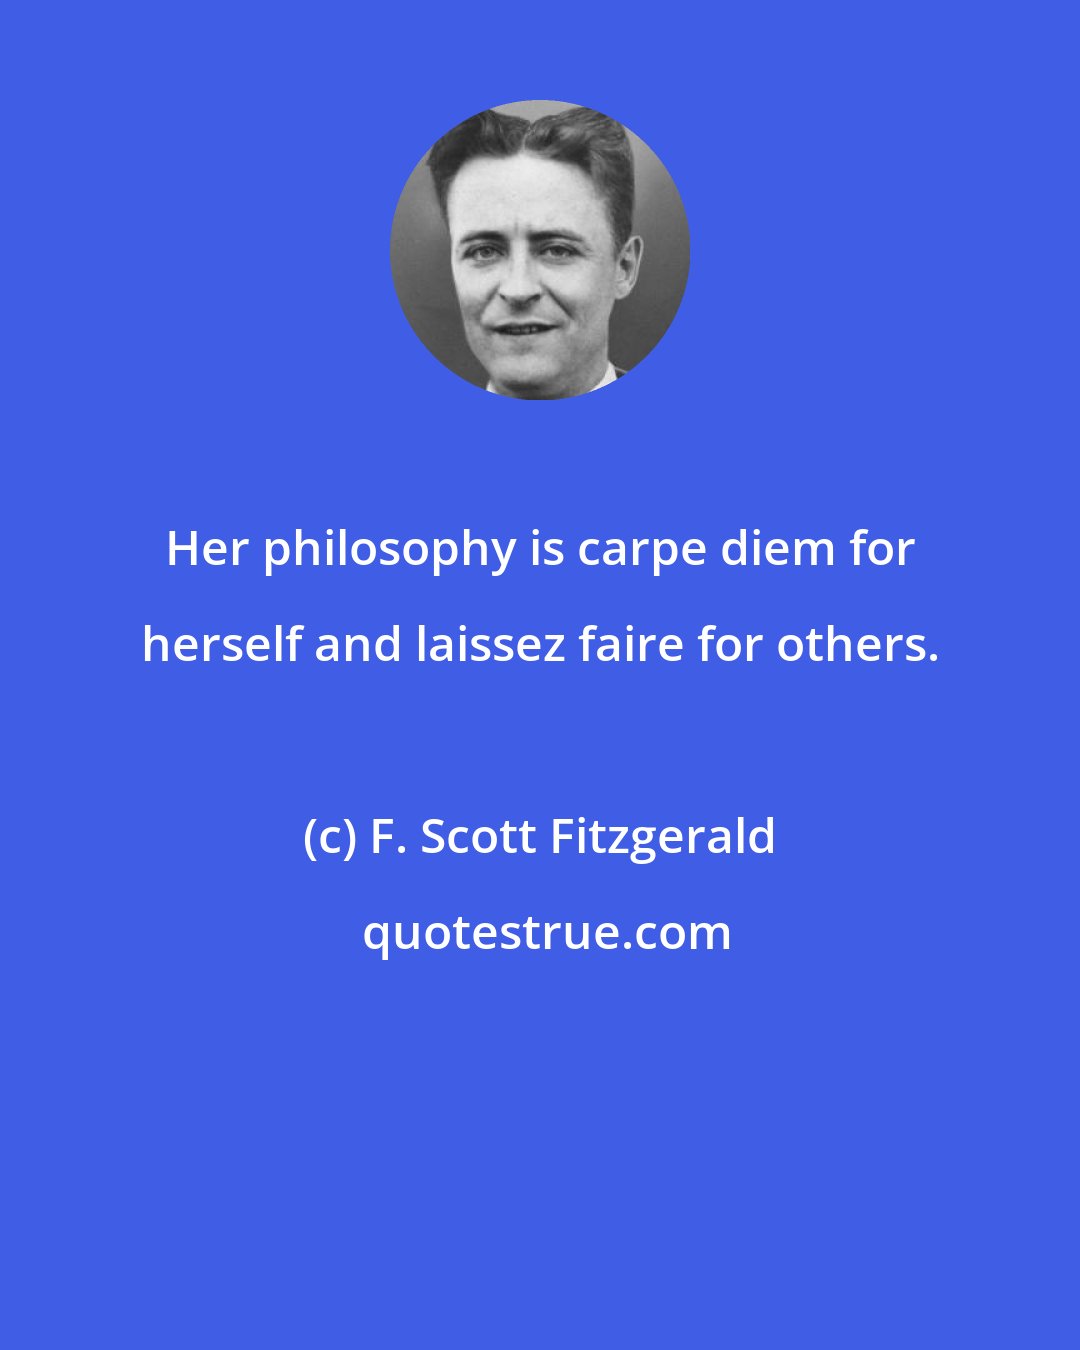 F. Scott Fitzgerald: Her philosophy is carpe diem for herself and laissez faire for others.